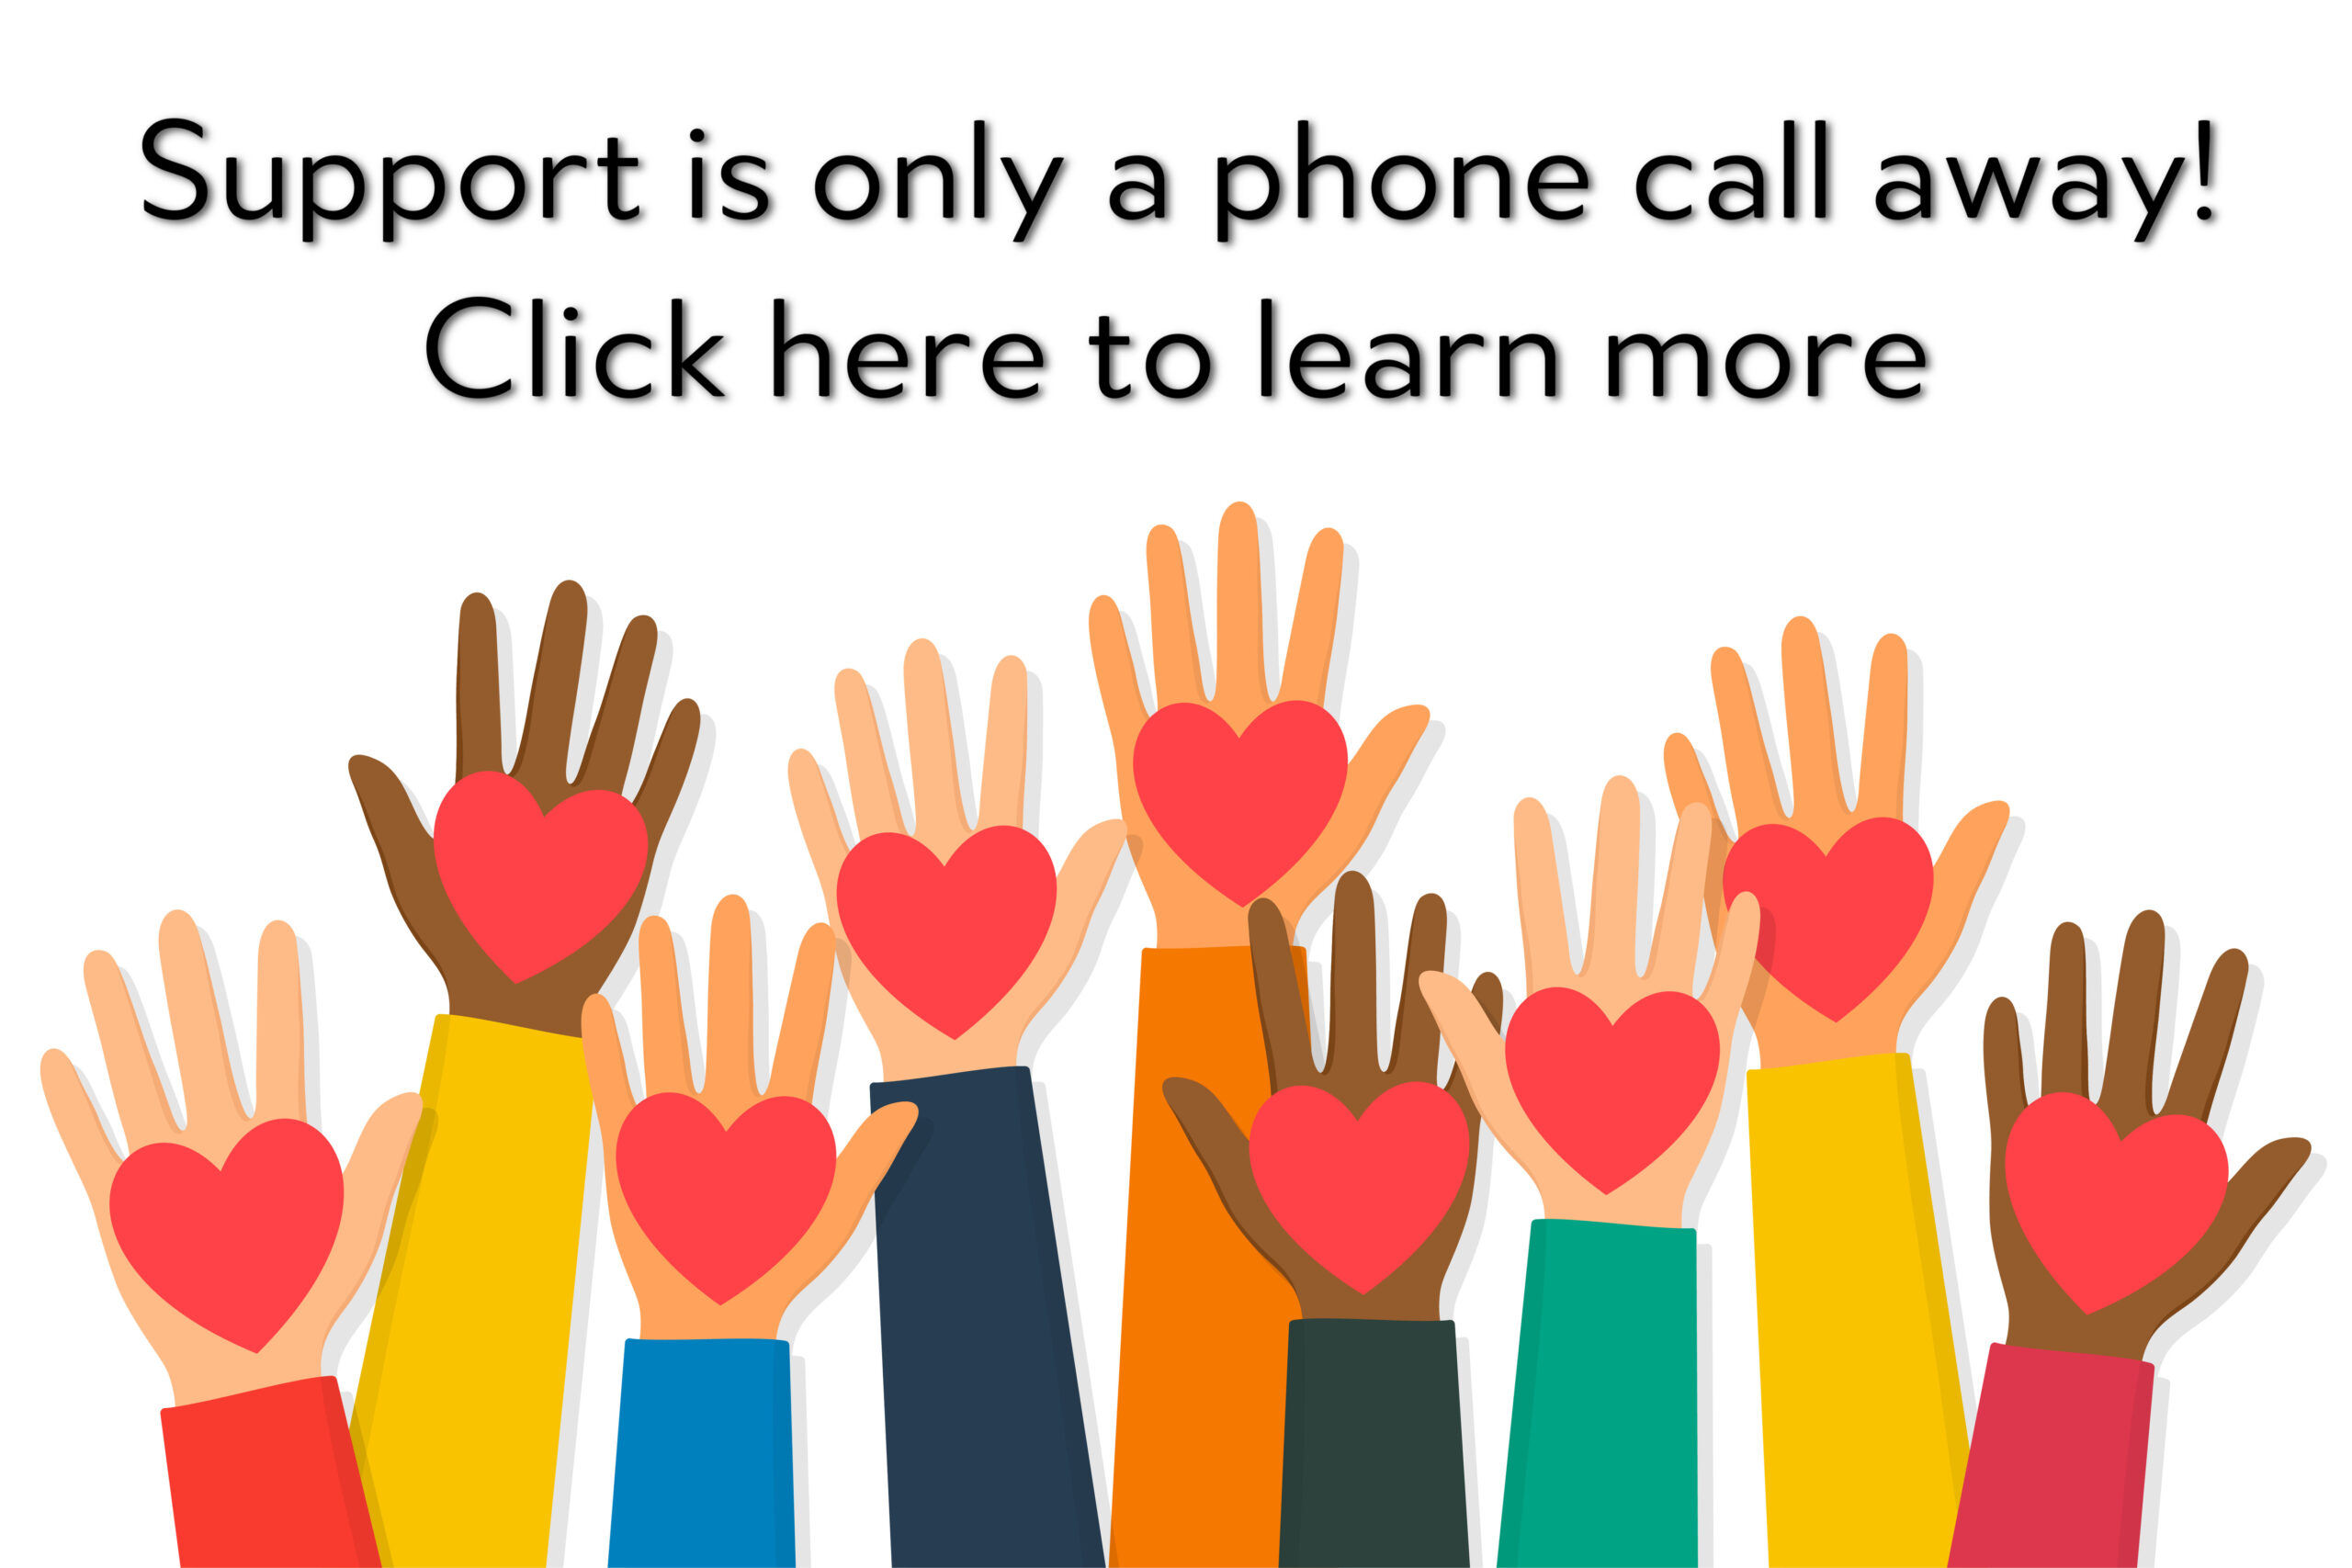 Image with a group of clip art hands, with a heart shape in the palms. Text reads "support is only a phone call away! Click here to learn more 